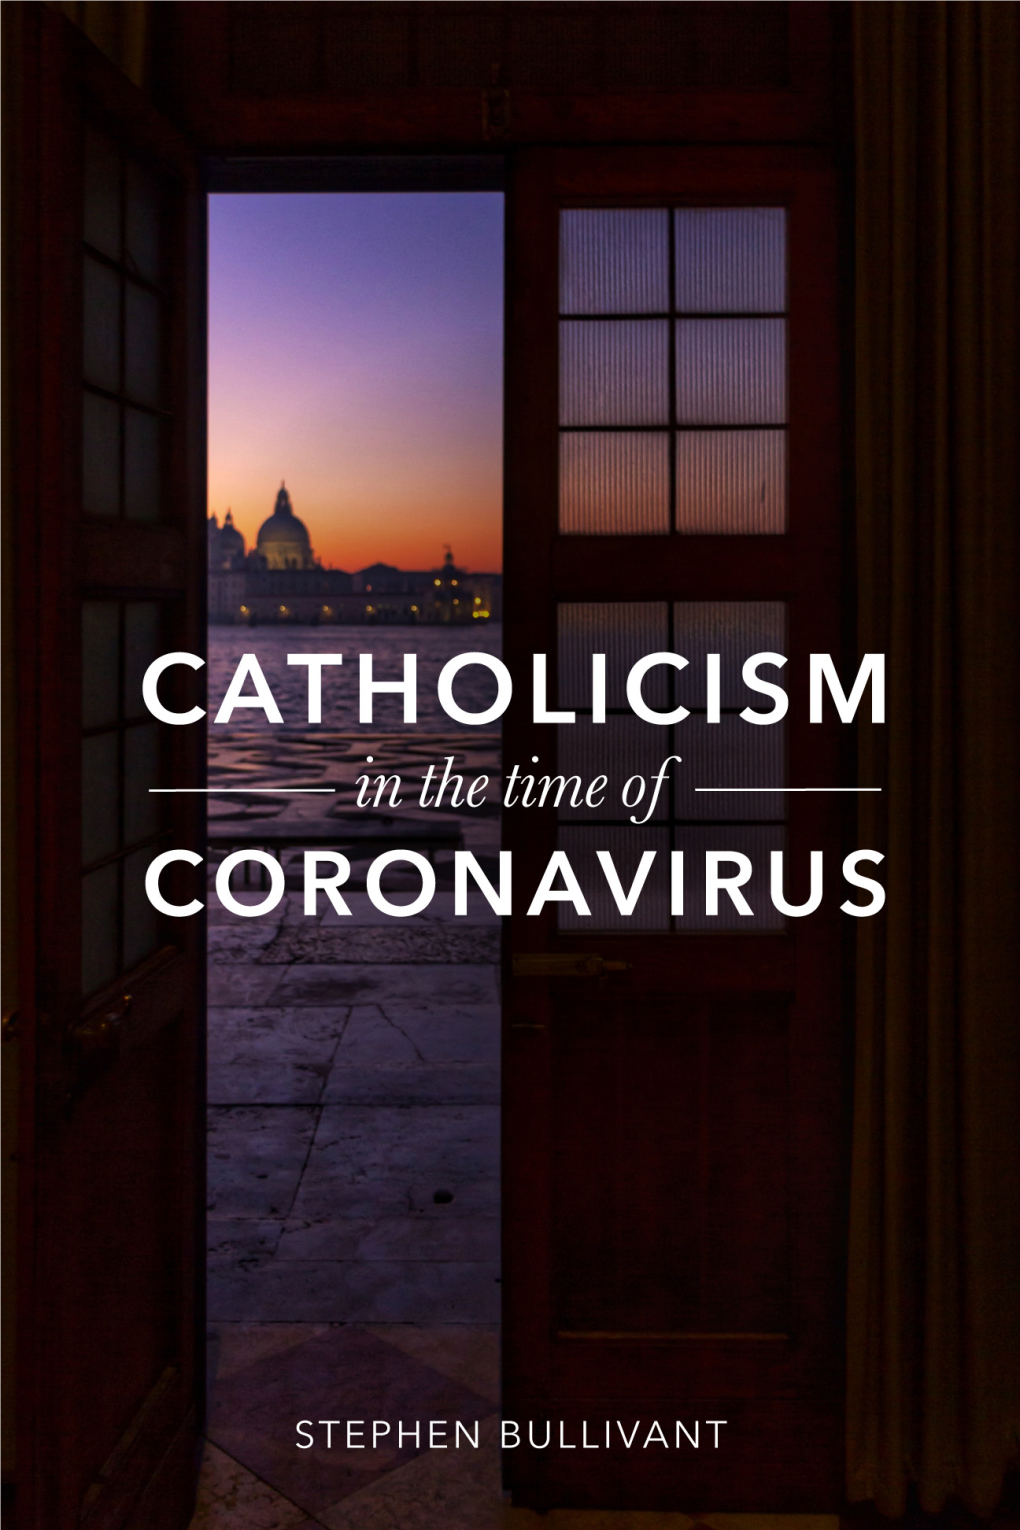 CATHOLICISM in the Time of CORONAVIRUS